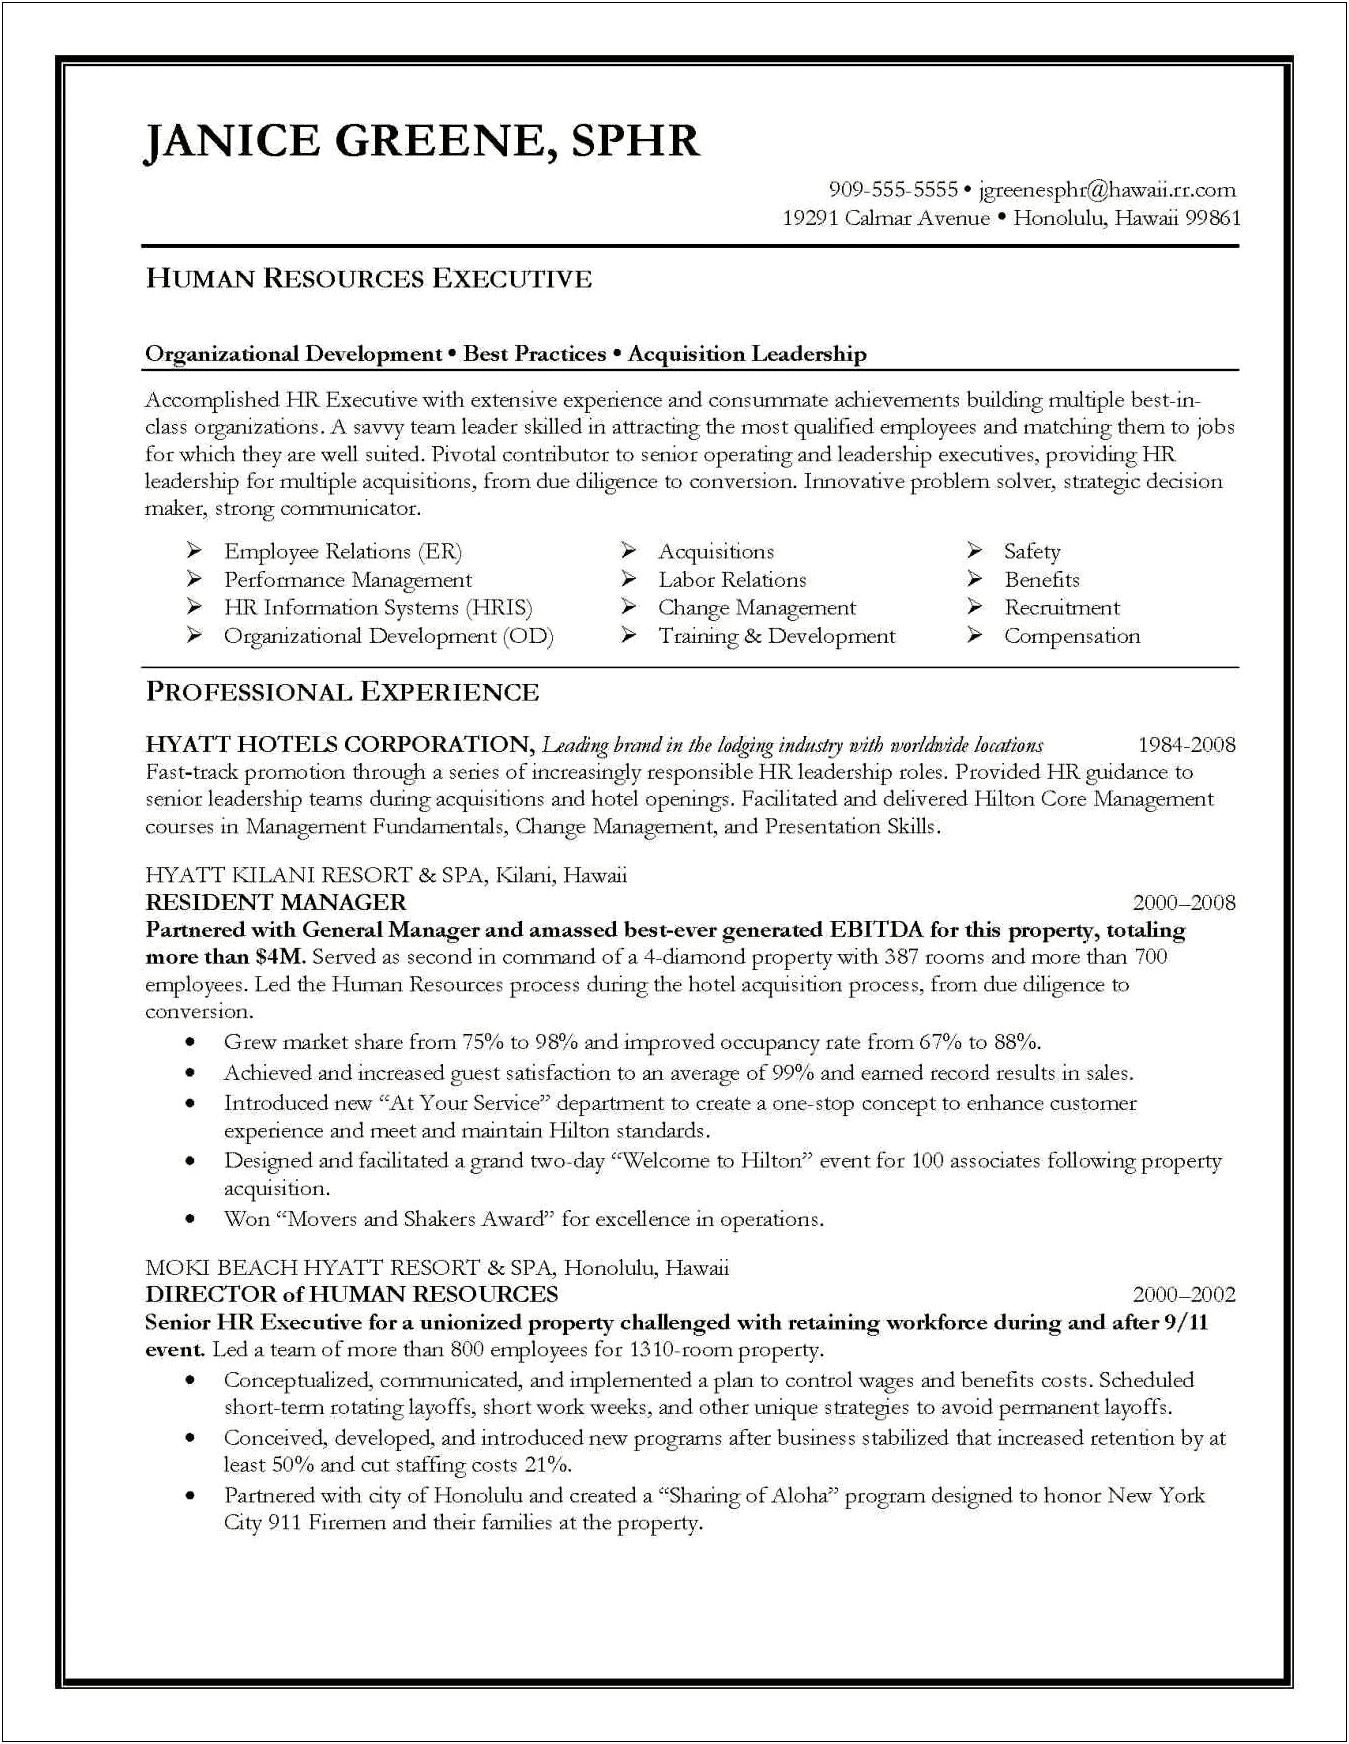 Resume Objective Statements For Leadership Position